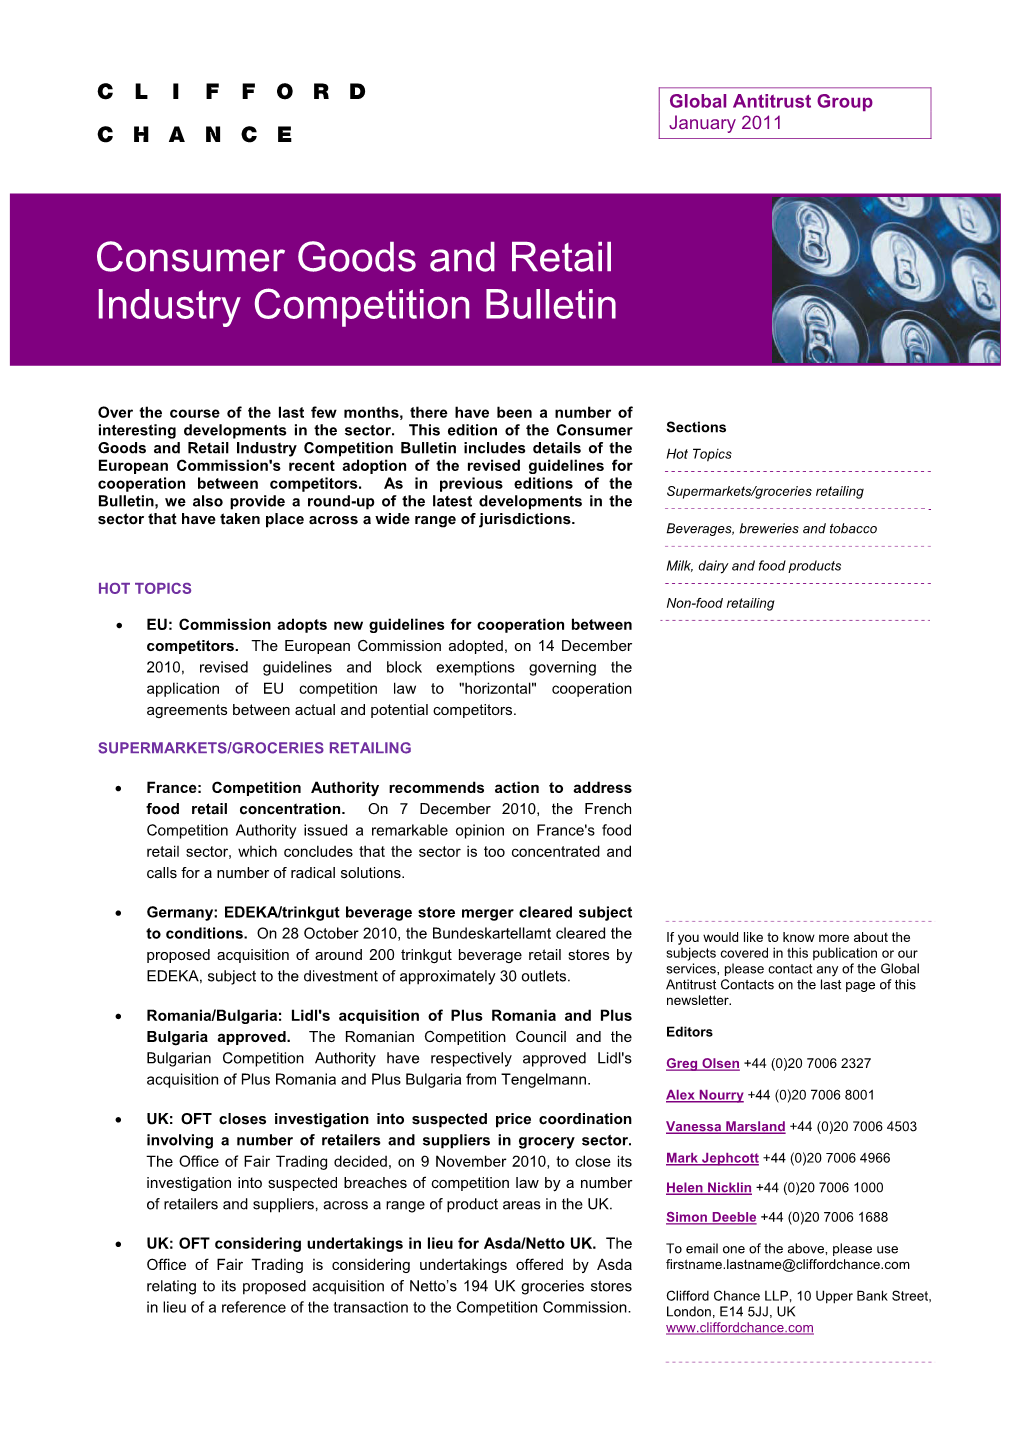 Consumer Goods and Retail Industry Competition Bulletin